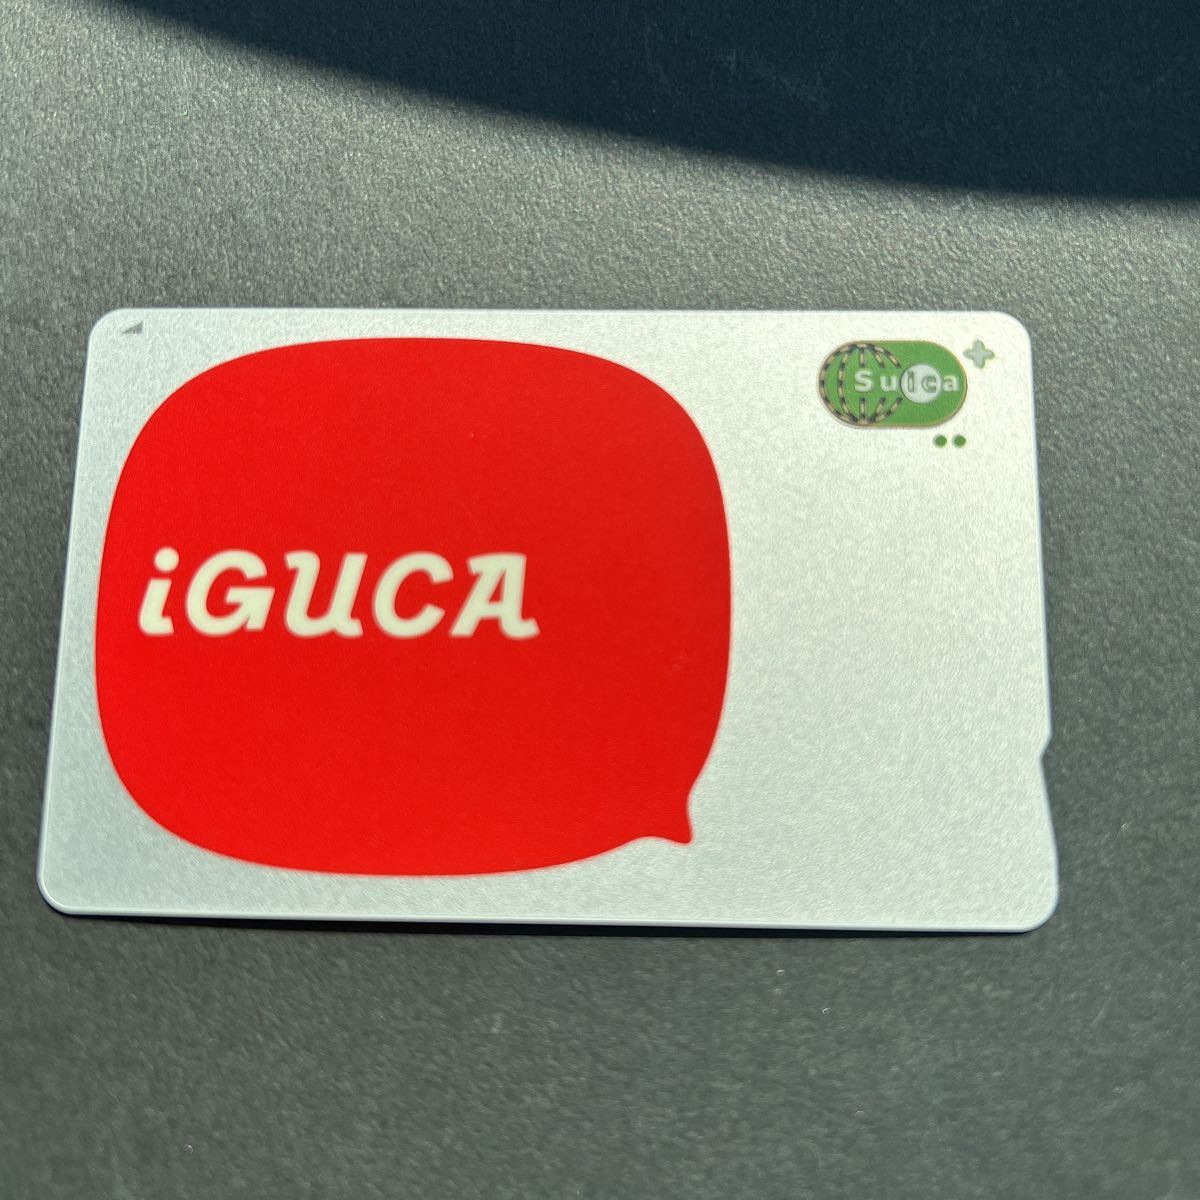  Iwate prefecture north bus IGUCAigka remainder height none traffic series IC card all country .. use possibility Suica. use .OK